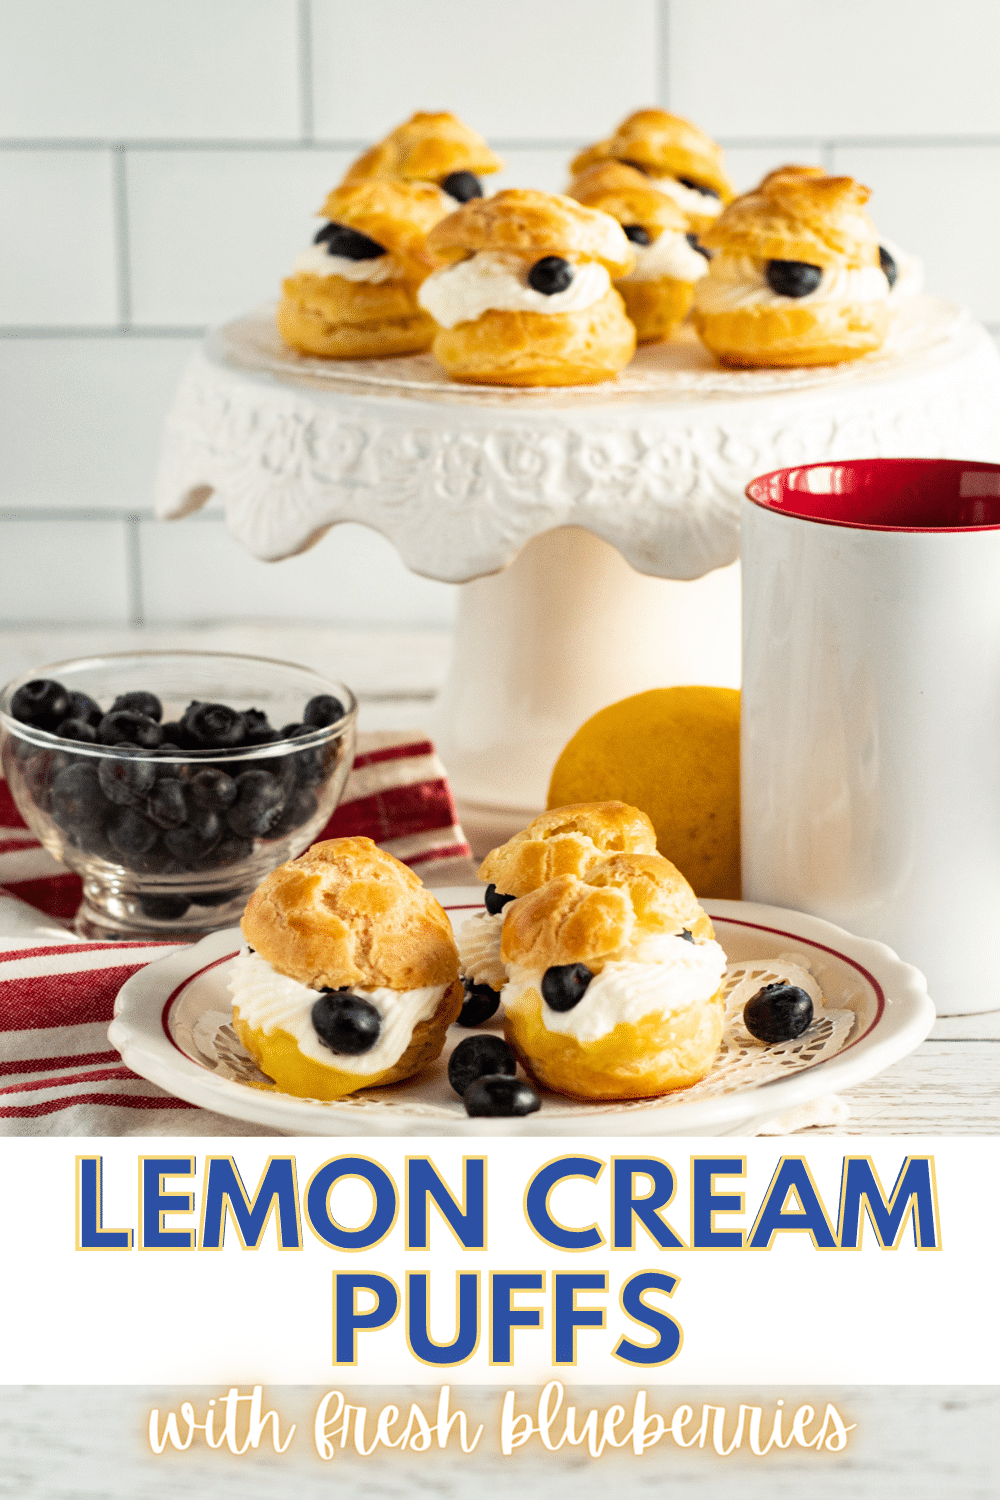 Lemon Cream Puffs With Fresh Blueberries on a plate and cake stand next to blueberries in a glass bowl, a lemon, a white and red mug and a white and red striped cloth with title text reading Lemon Cream Puffs with fresh blueberries